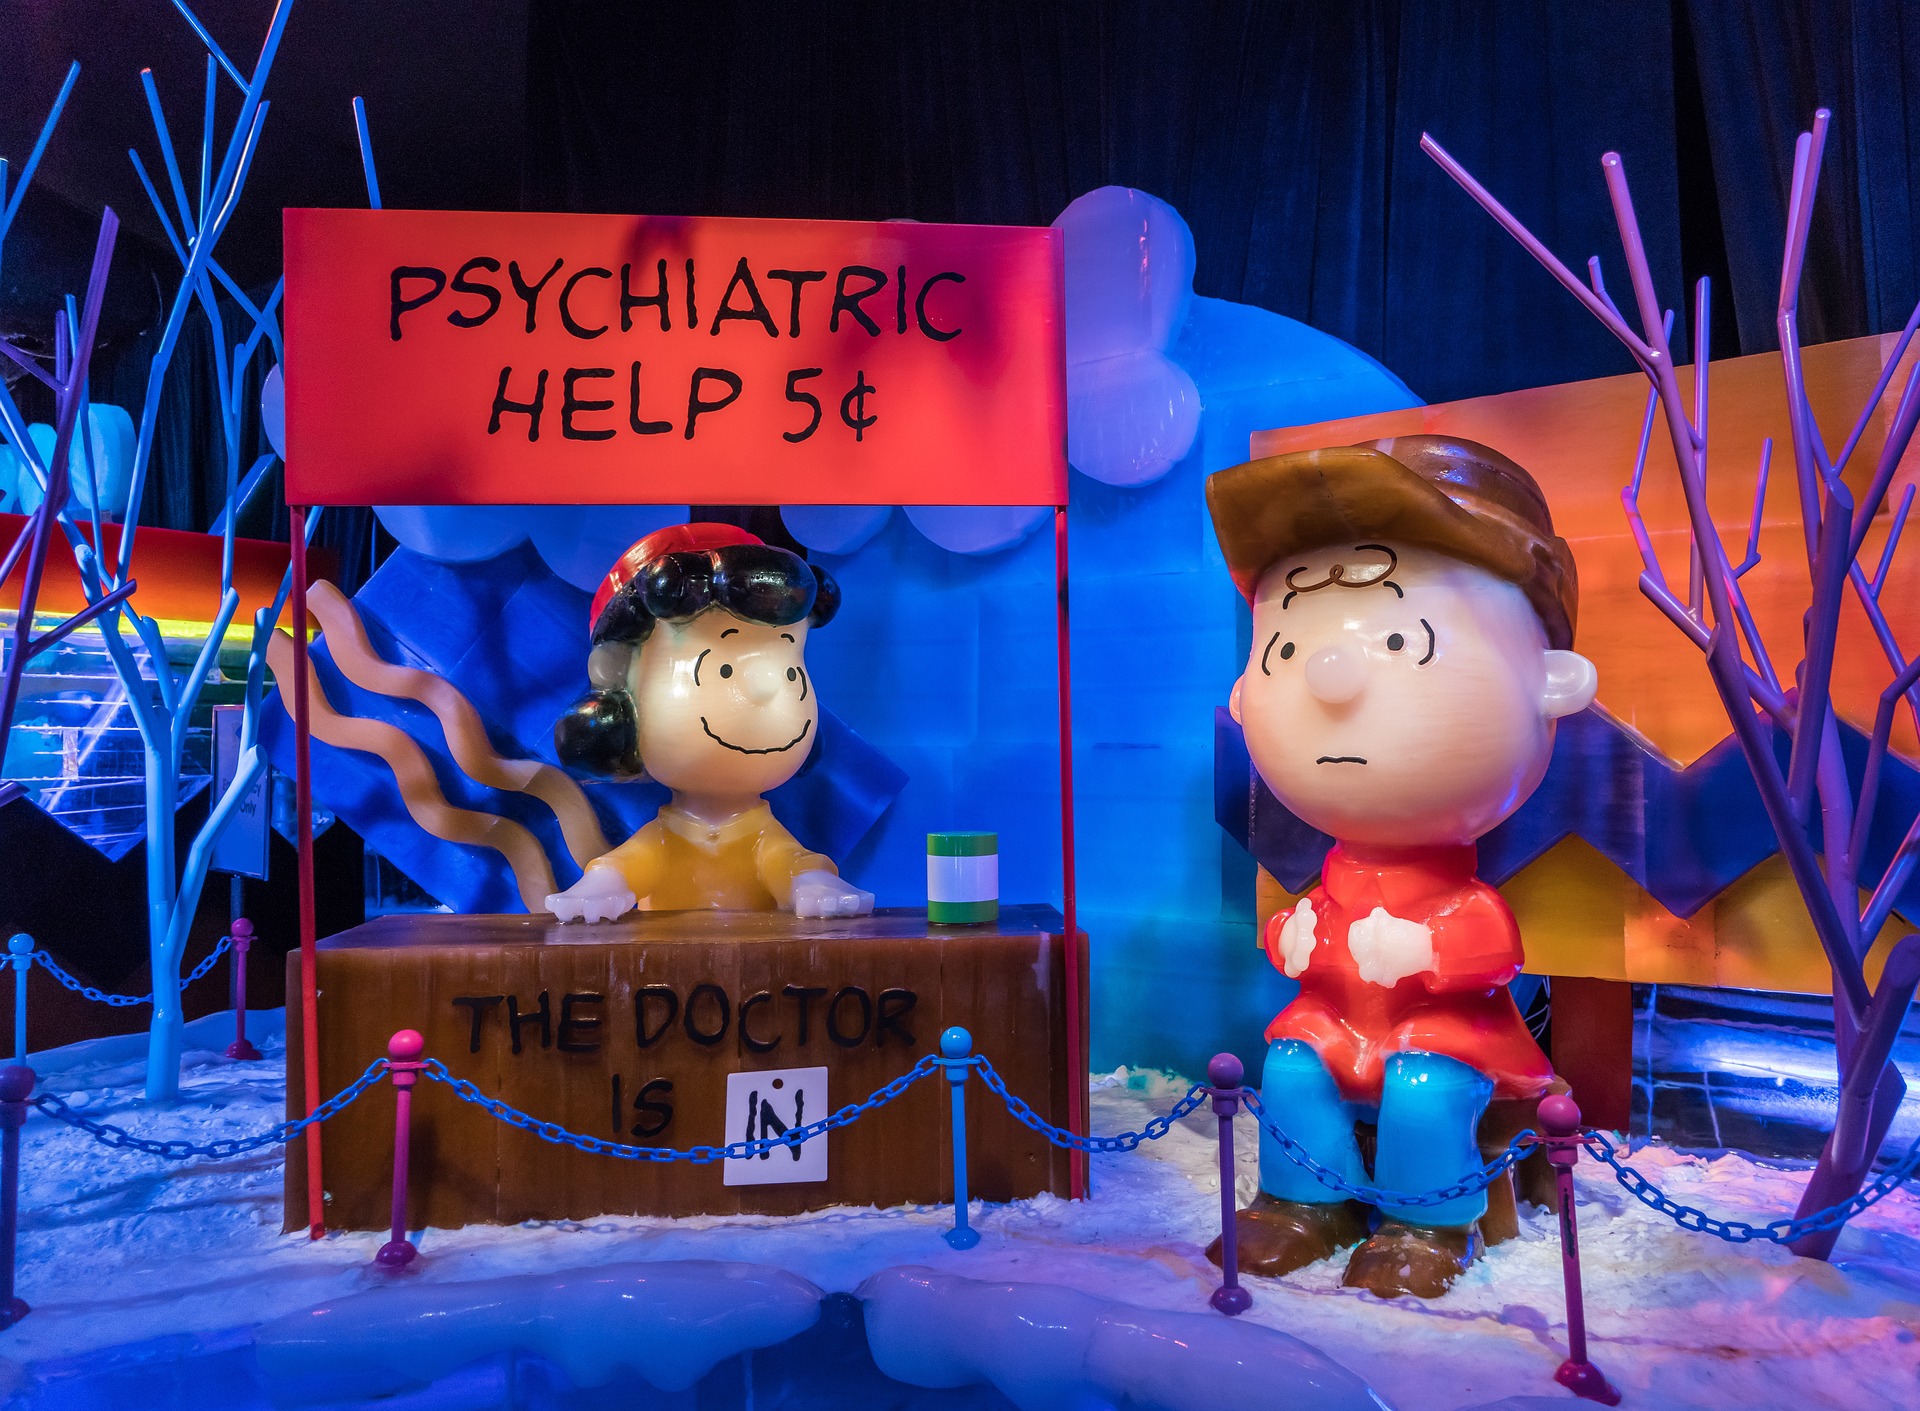 Ice sculpture of Charlie Brown with Lucy at Psychiatric Help 